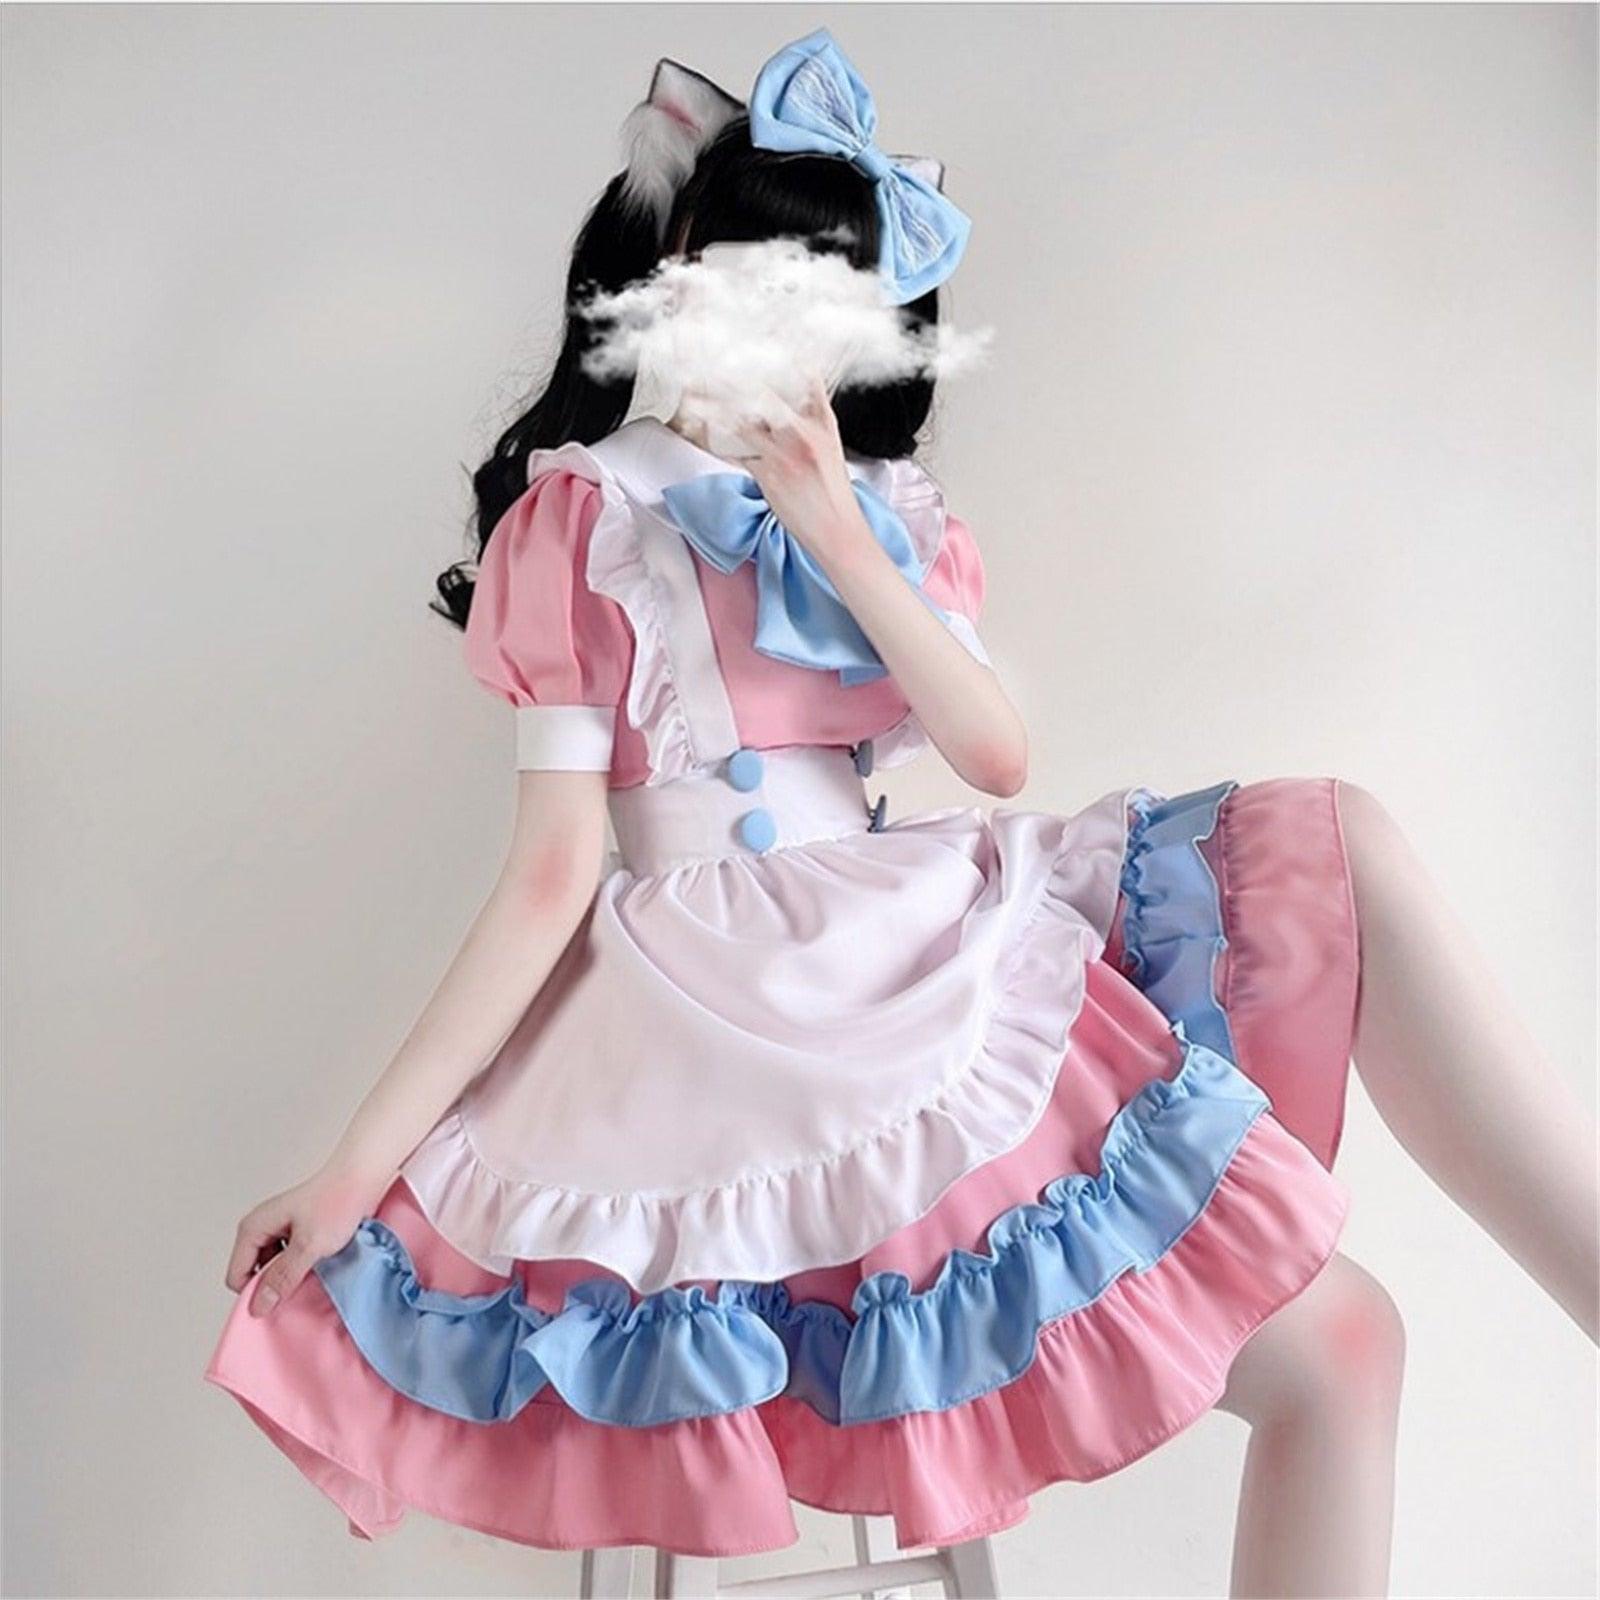 Kawaii Lolita Pink & Blue Maid Outfit - Costumes - Femboy Fatale